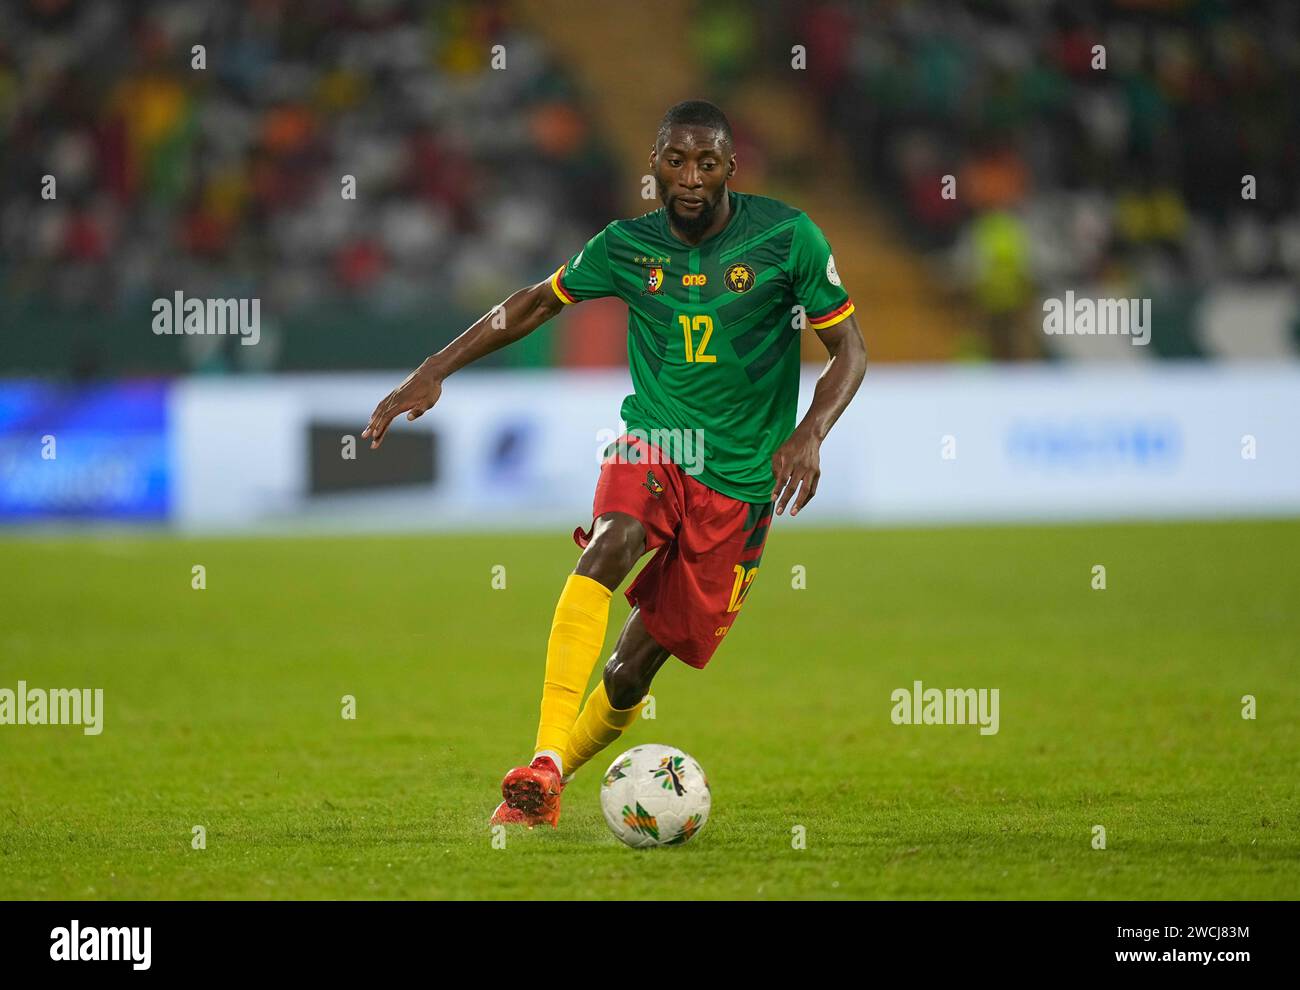 January 15 2024: Karl Brillant Toko Ekambi (Cameroon) controls the ball during a African Cup of Nations Group C game, Cameroon vs Guinea, at Stade Charles Konan Banny, Yamoussoukro, Ivory Coast. Kim Price/CSM Stock Photo